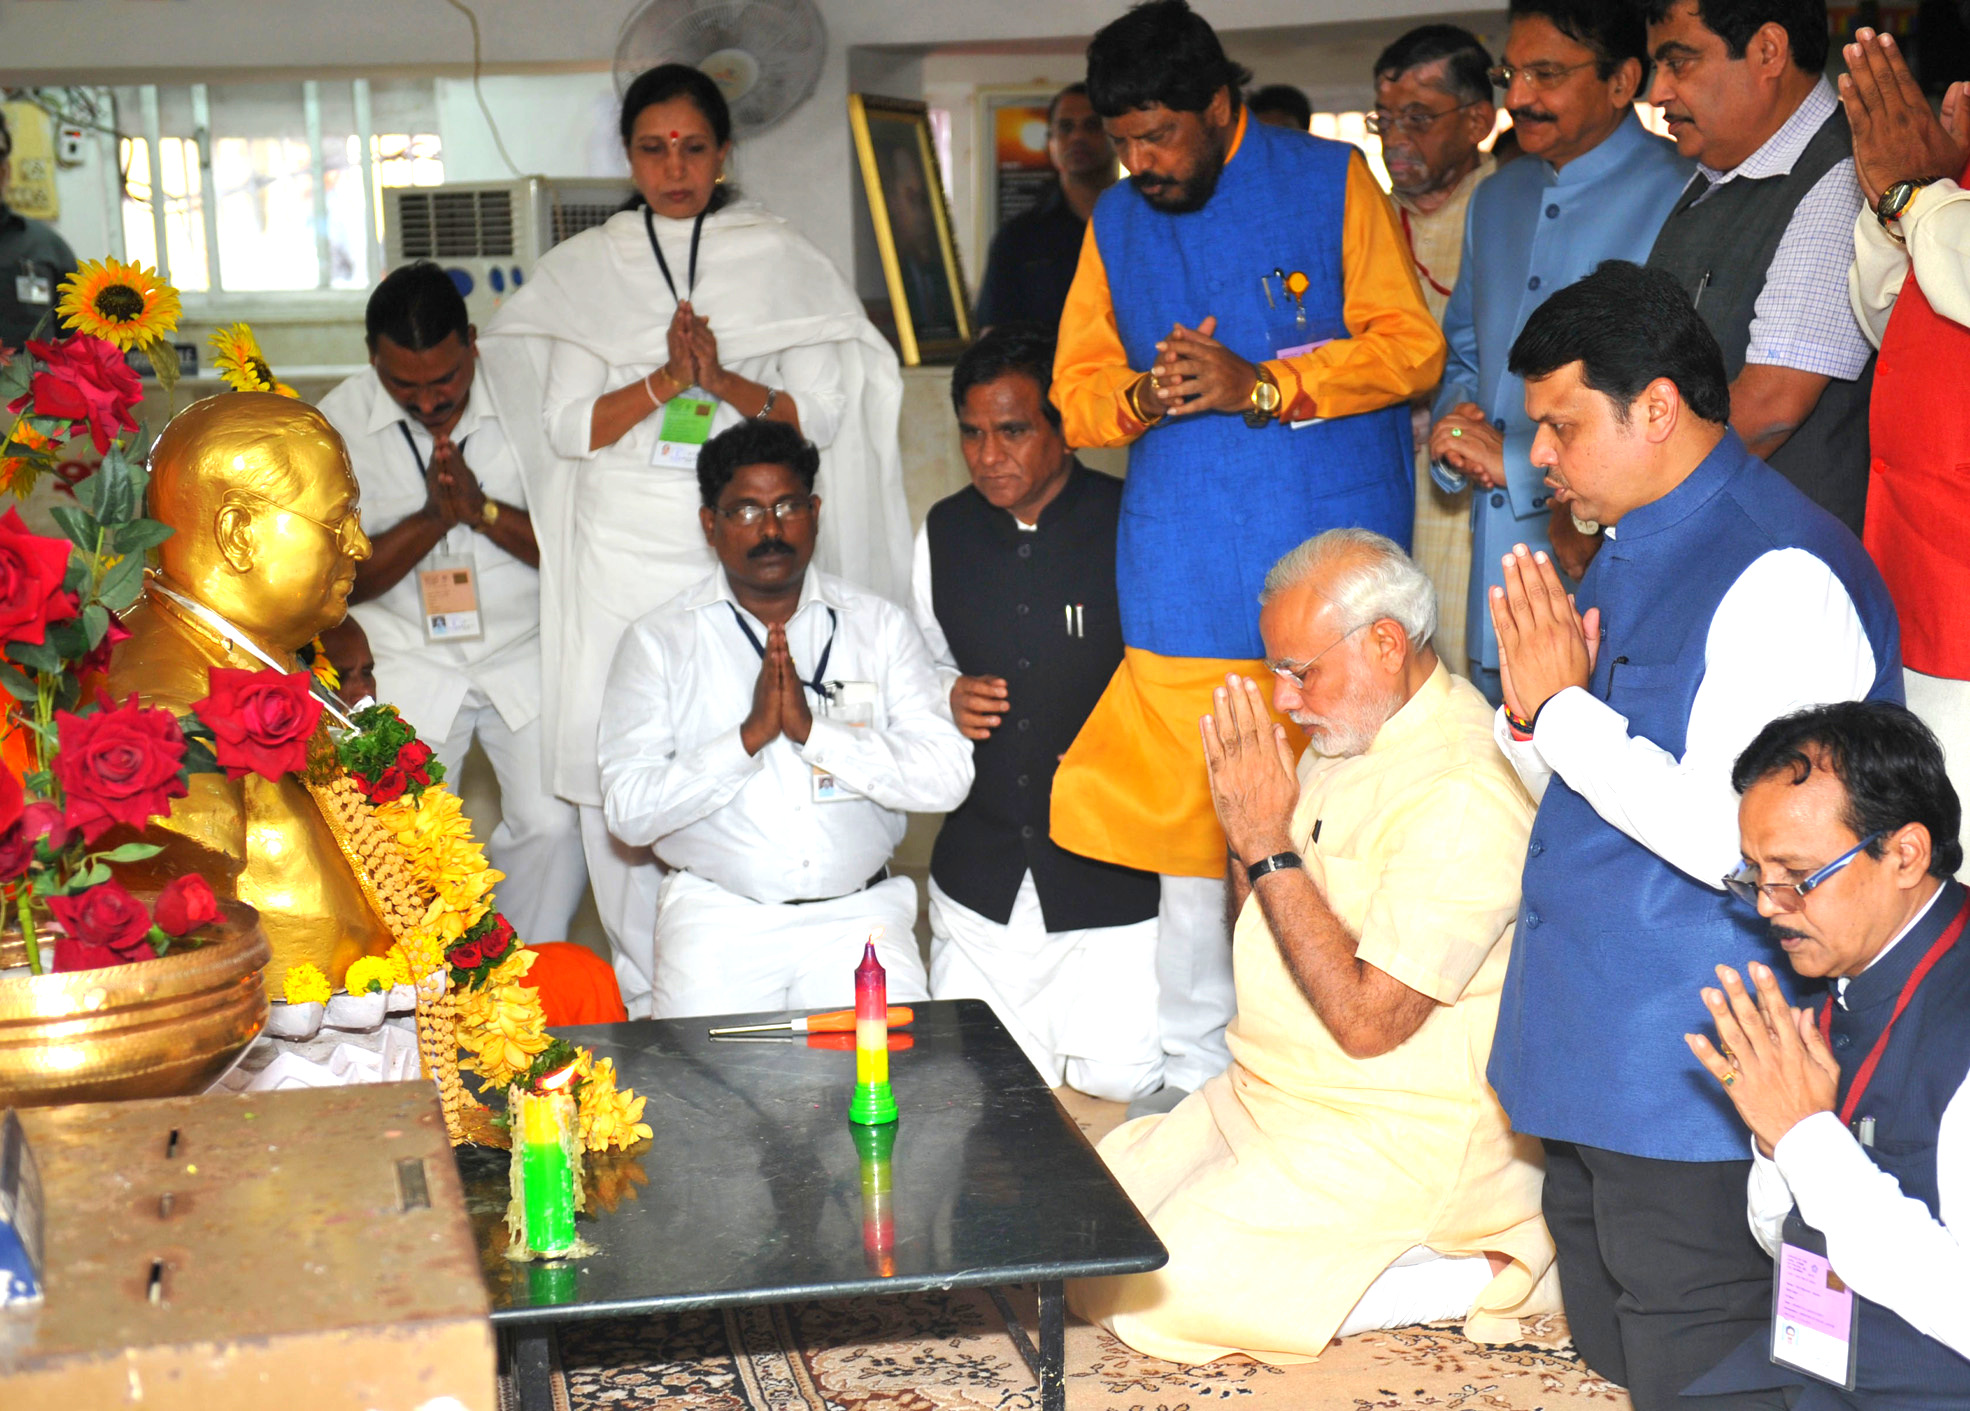 The Prime Minister, Shri Narendra Modi paying respects to Dr. Babasaheb Ambedkar, at Chaitya Bhoomi, in Mumbai on October 11, 2015. The Governor of Maharashtra, Shri C. Vidyasagar Rao, the Chief Minister of Maharashtra, Shri Devendra Fadnavis and the Union Minister for Road Transport & Highways and Shipping, Shri Nitin Gadkari and other dignitaries are also seen.